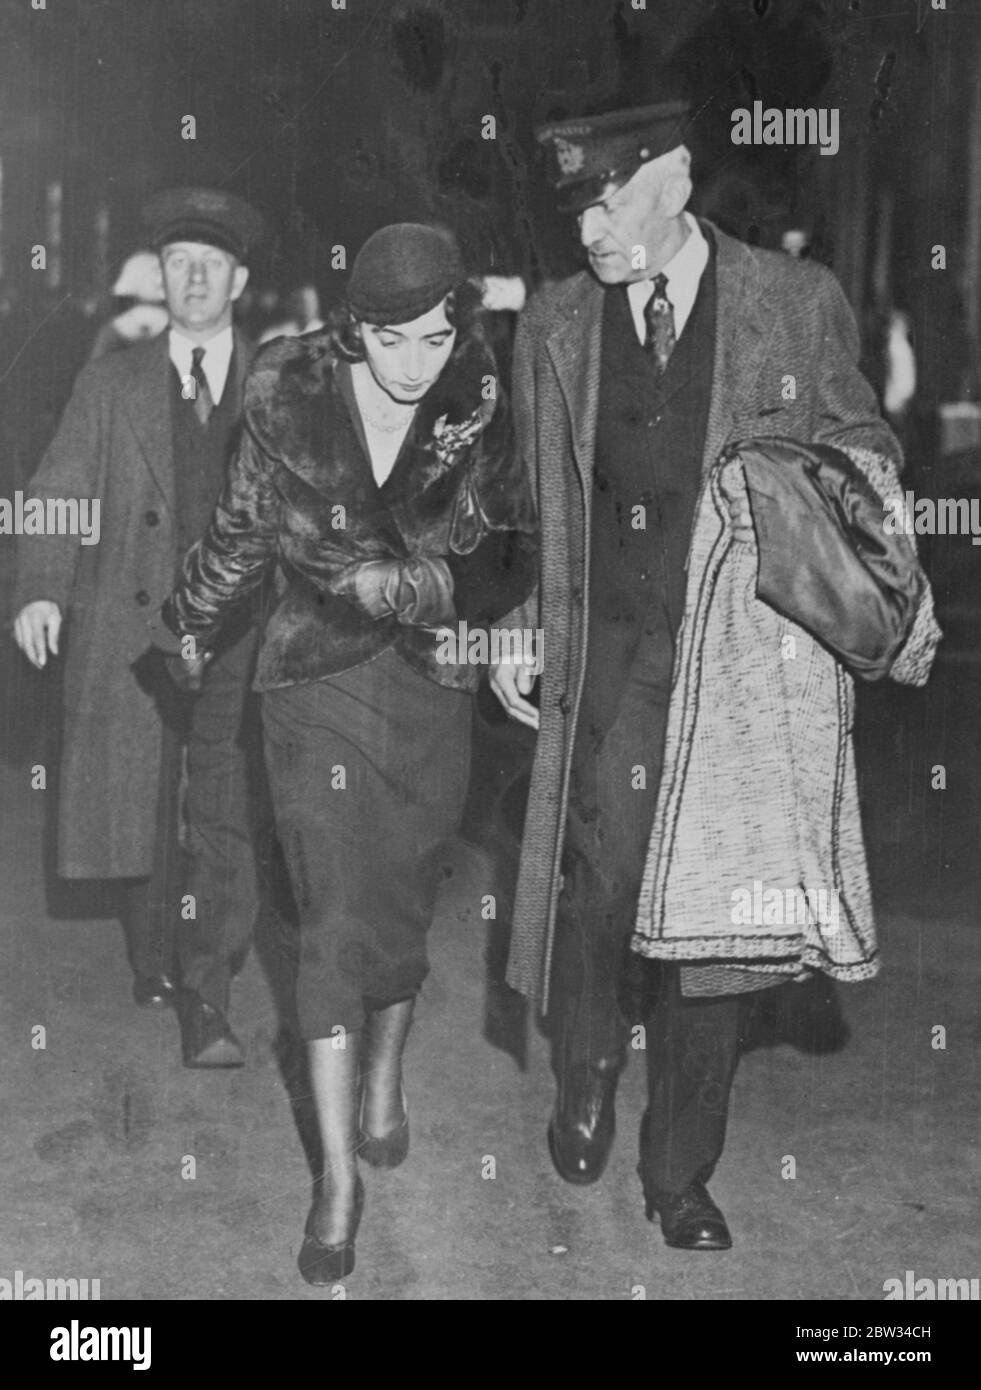 Lindbergh nurse returns to nurse new baby . Betty Gow , former nurse of Charles A Lindbergh , Jr arrived back in New York from Scotland , after visiting her home in Scotland following the tragedy of the Lindbergh baby ' s murder . She is to nurse Jon Morrow Lindbergh , the second child of the famous aviator and his wife . Betty Gow with a Customs officer on arrival in New York . 3 November 1932 Stock Photo